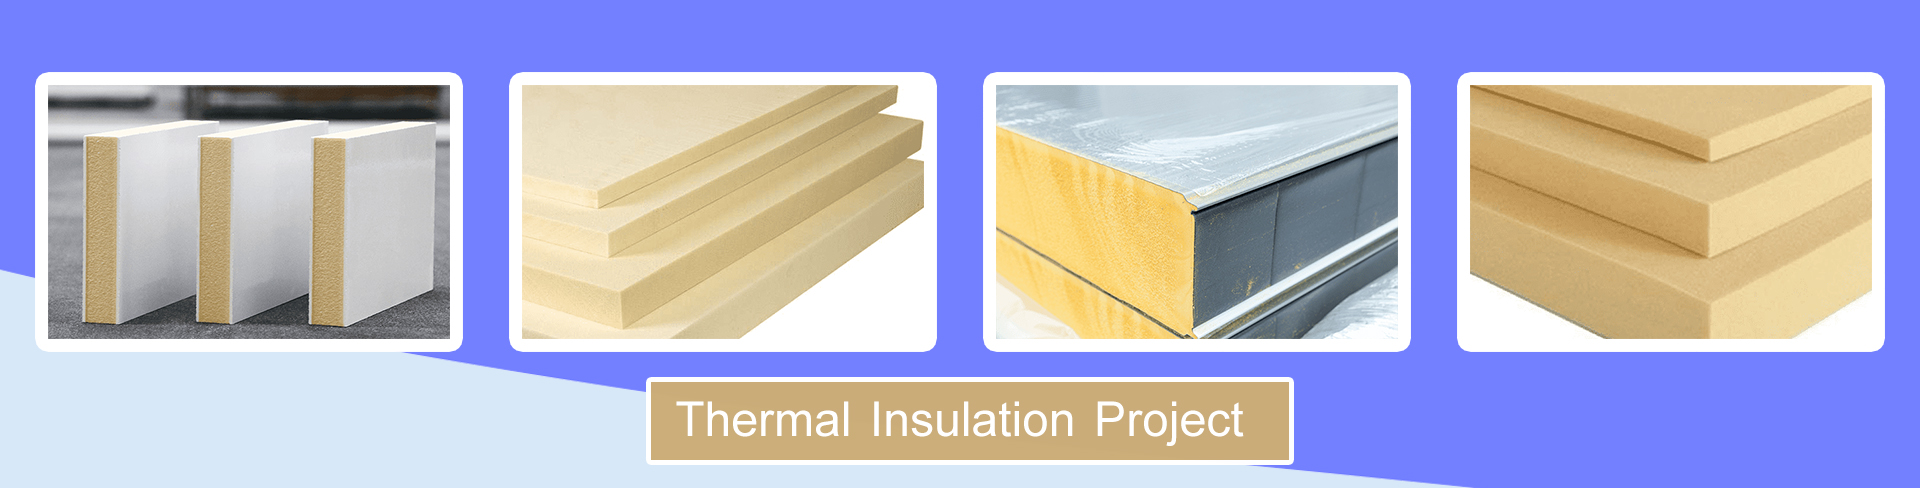 Thermal Insulation Project